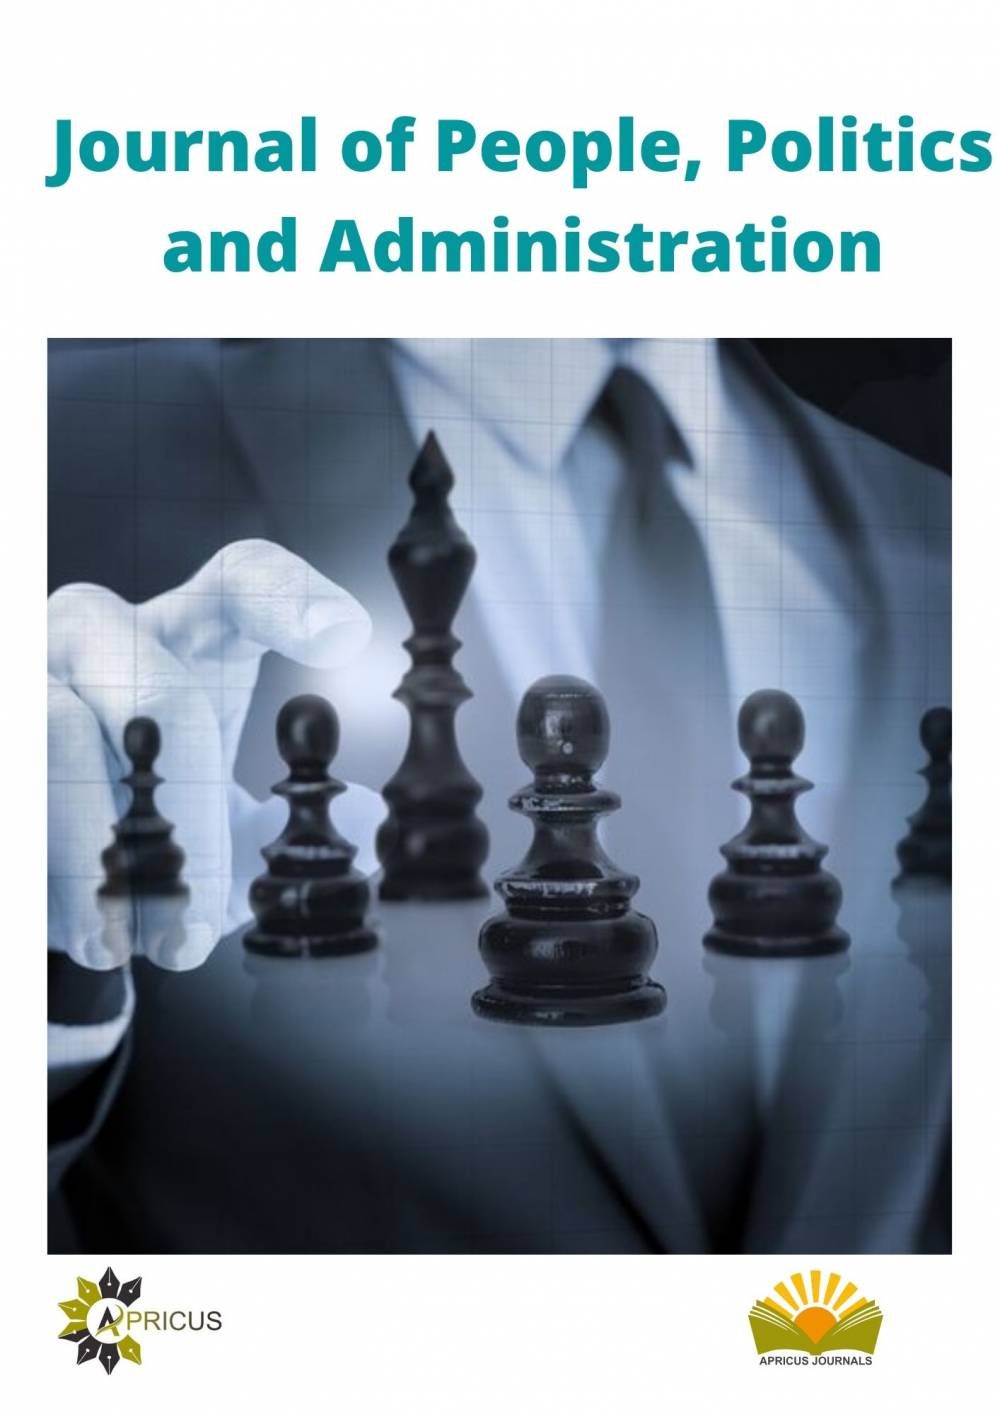 Journal of People, Politics and Administration